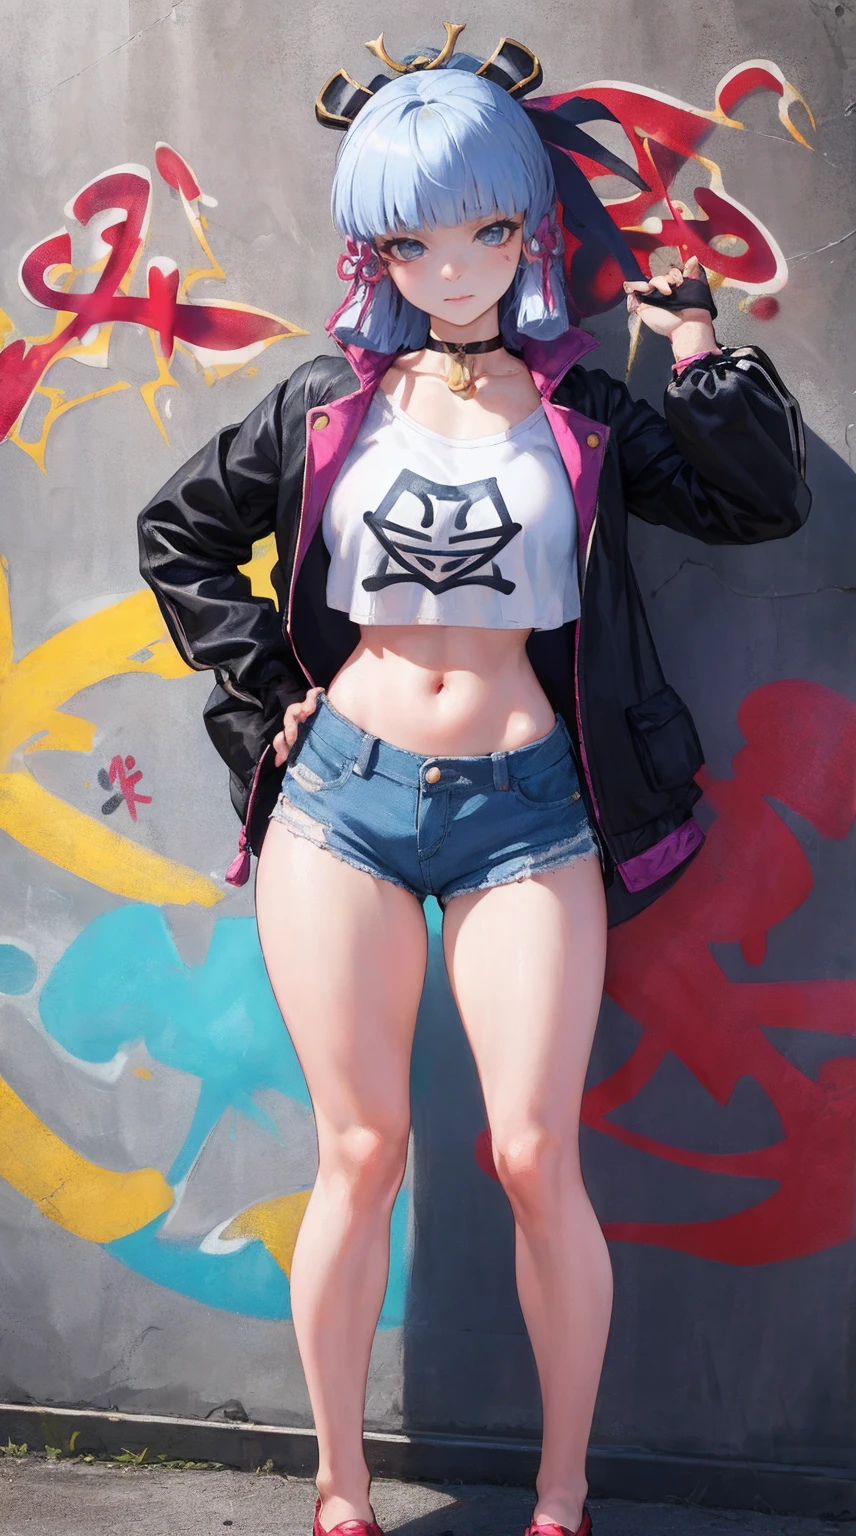 kamisato ayaka|genshin impact, master-piece, bestquality, 1girls, youthful, proportional body, elongated legs, Beautiful, proportional., crop top, Long Jeans, big breasts, ,bara, crop top, choker, (Graffiti:1.5), Splash with purple lightning pattern., arm behind back, against wall, View viewers from the front., Thigh strap, Head tilt, bored,(NSTDA.:1.2), (10, beste-Qualit, master-piece: 1.4), Beautiful red hair, ultra-high resolution, (lifelike, photorealistic portrait: 1.48), 20 age, Cute Girl, (Looking Through Crop Tops.), Famous Japanese actors, beautiful clear eyes, Head tilt, cowboy shot, from the front, looking at the audience, expressionless, Beautiful lake, Zeiss 150mm F/ 2.8 Hasselblad,  Whole body, foot, Ultra-Wide Angle,full body figure,full photo , head to toes full body , thighshighs wearing shoes, black blue patterns shoes,